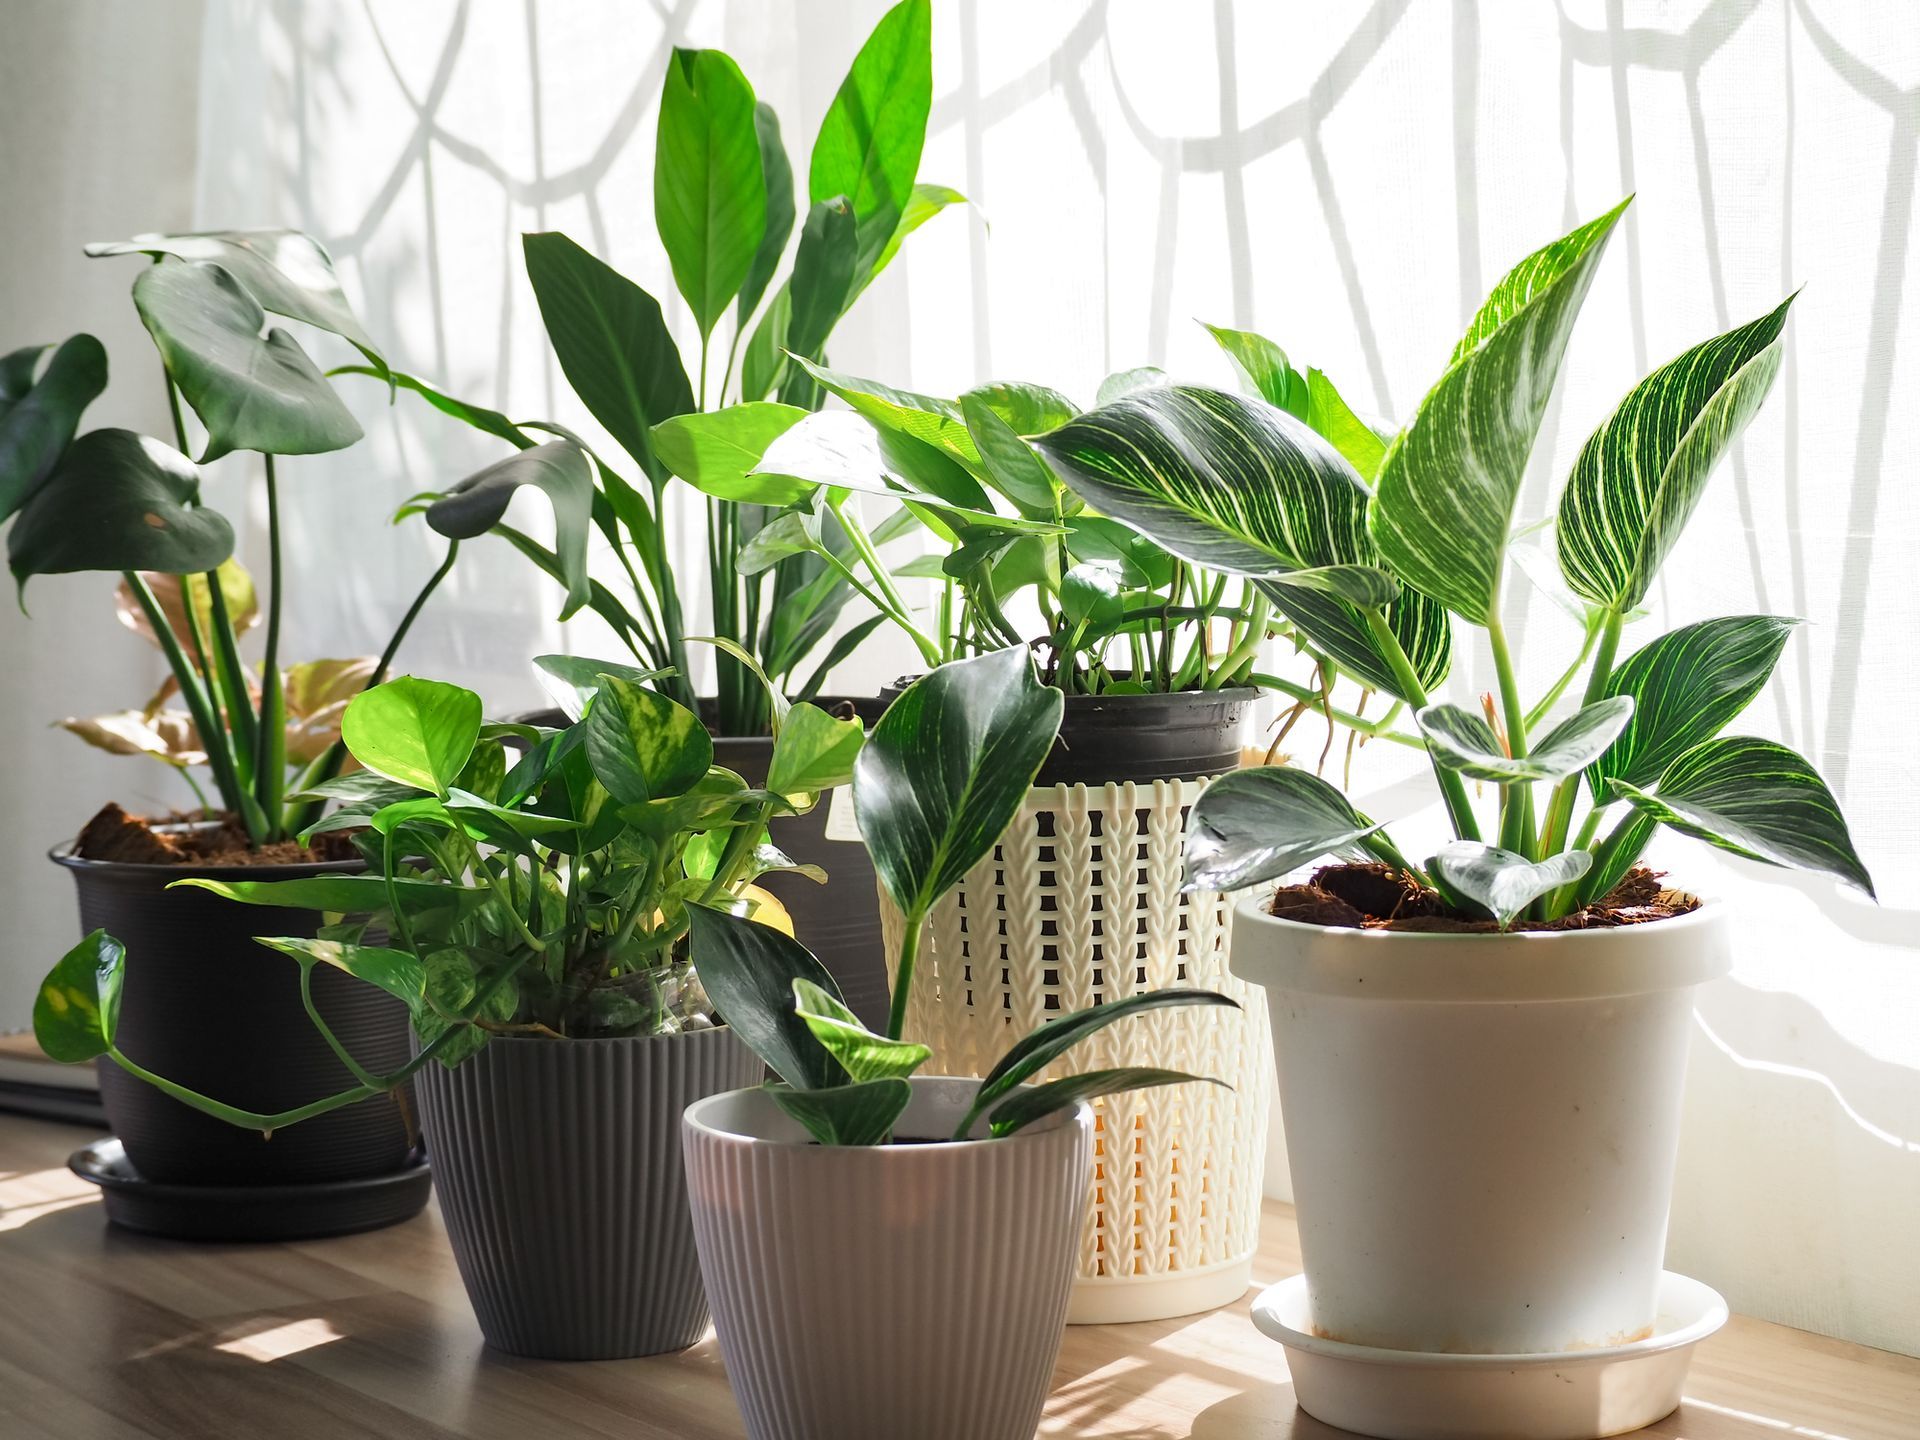 A group of potted plants are sitting on a table in front of a window.